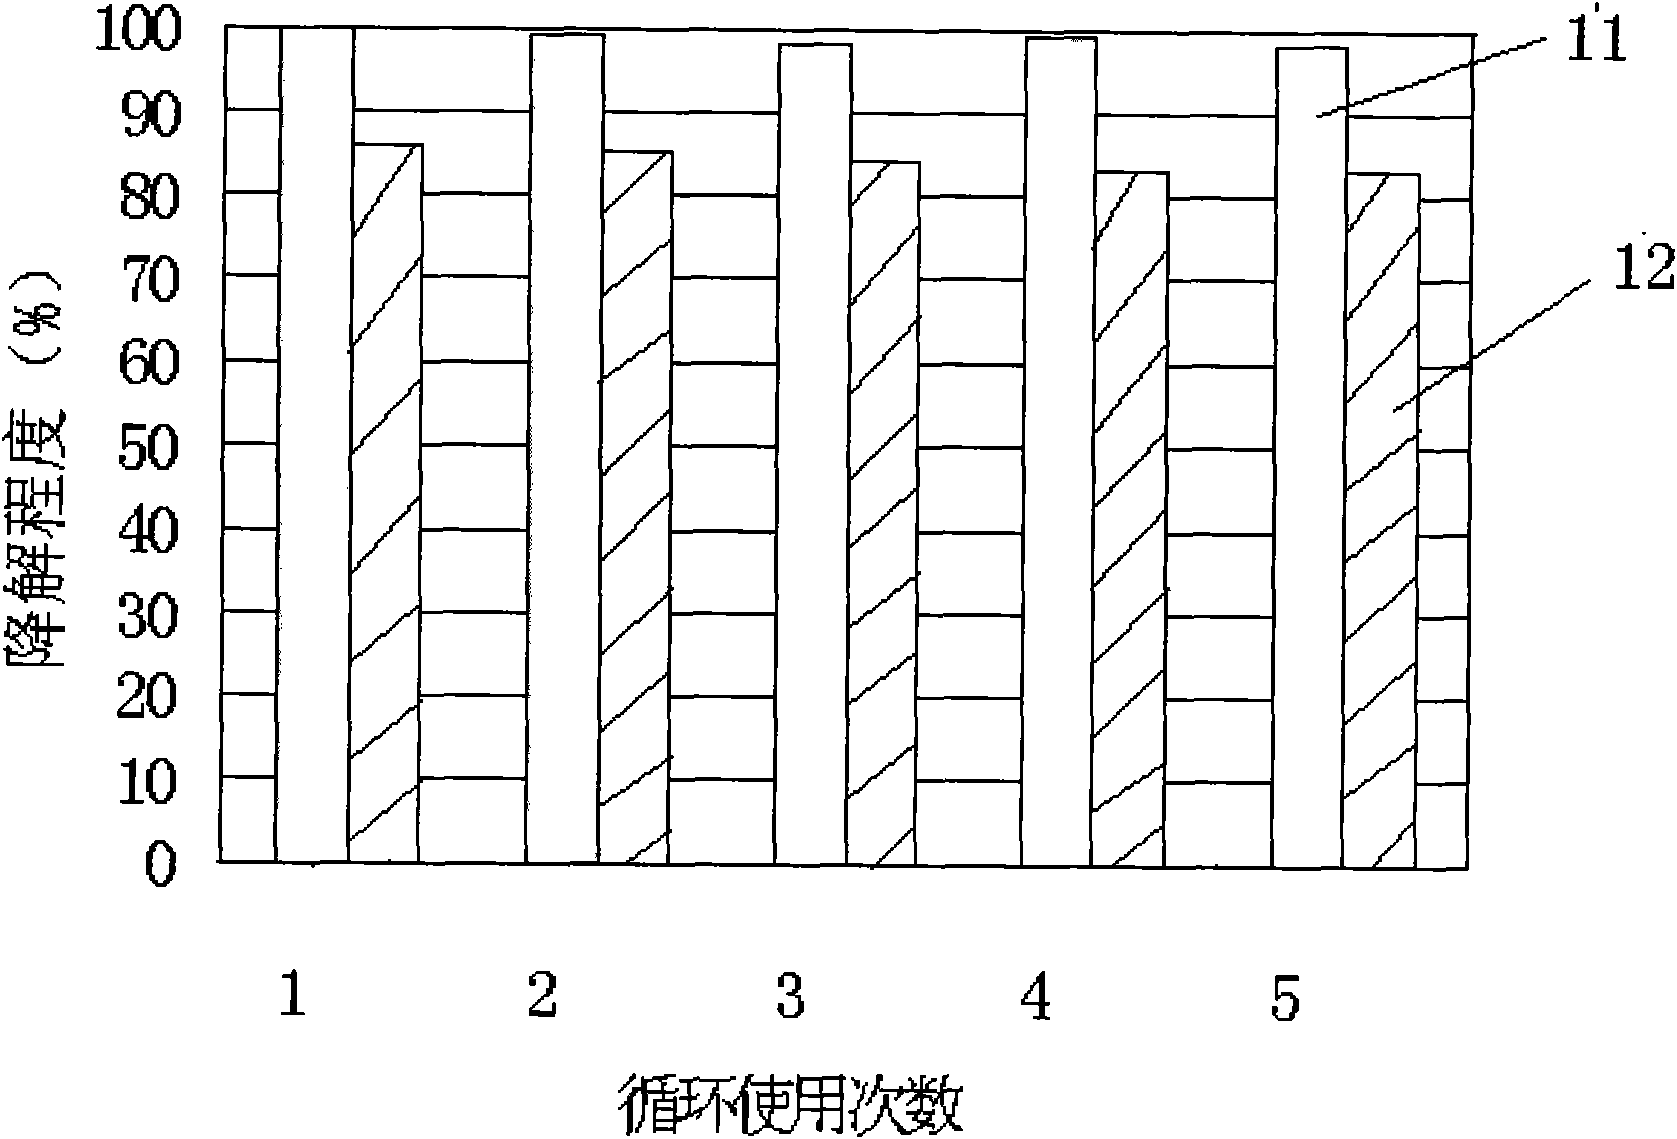 High-efficiency nano silver/silver bromide sunshine photocatalytic material and preparation method thereof